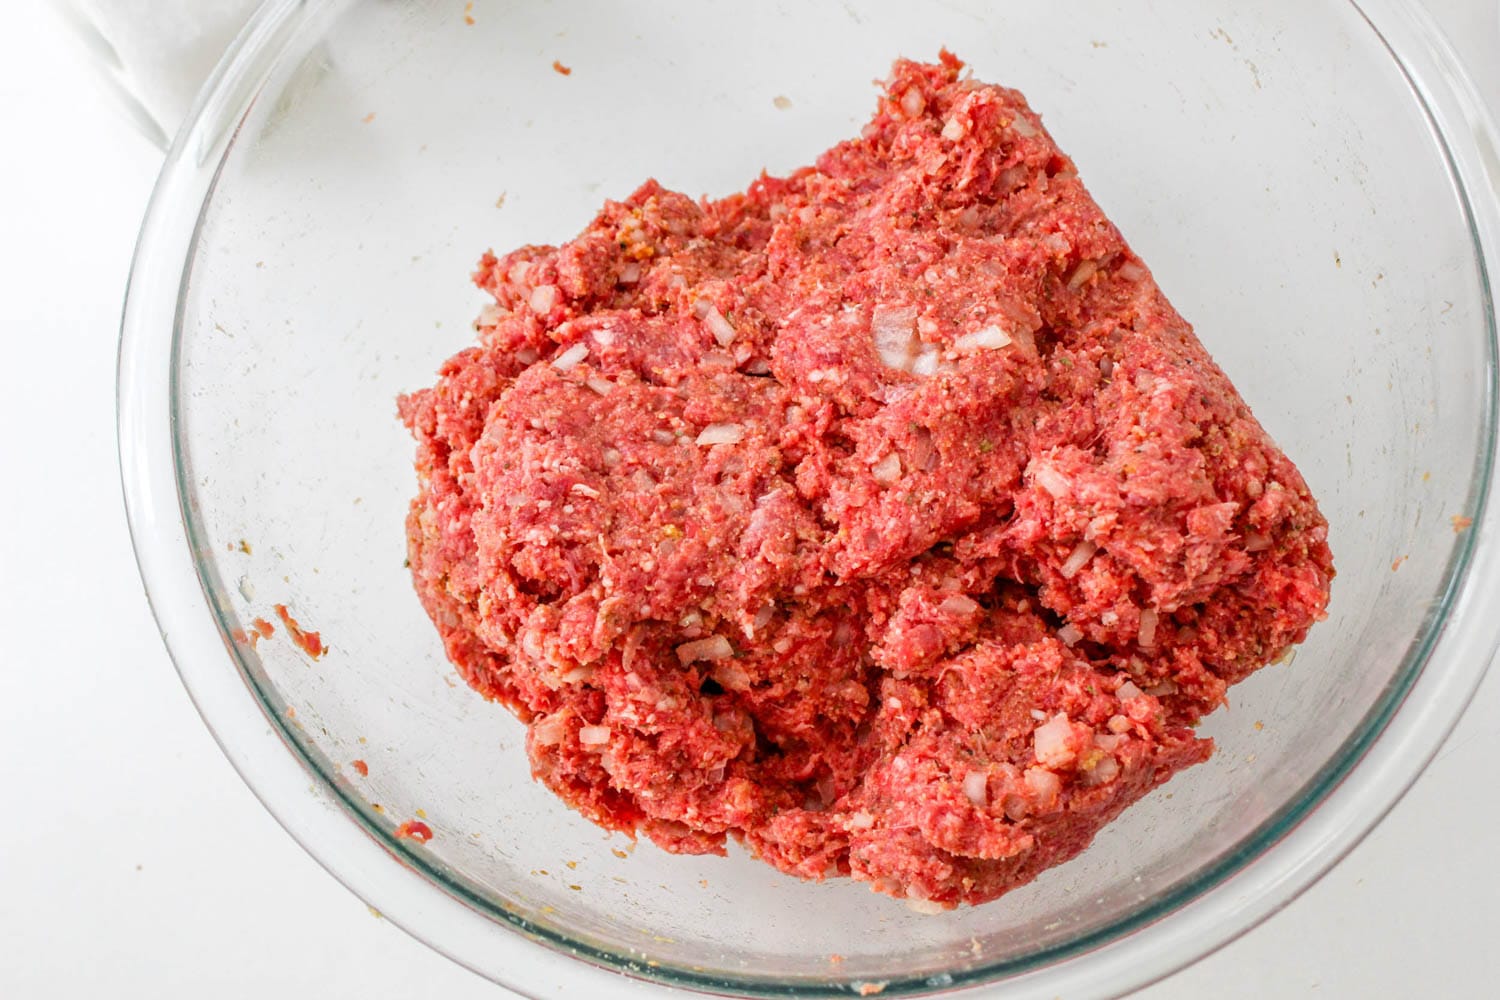 Meatloaf mixture in a glass bowl